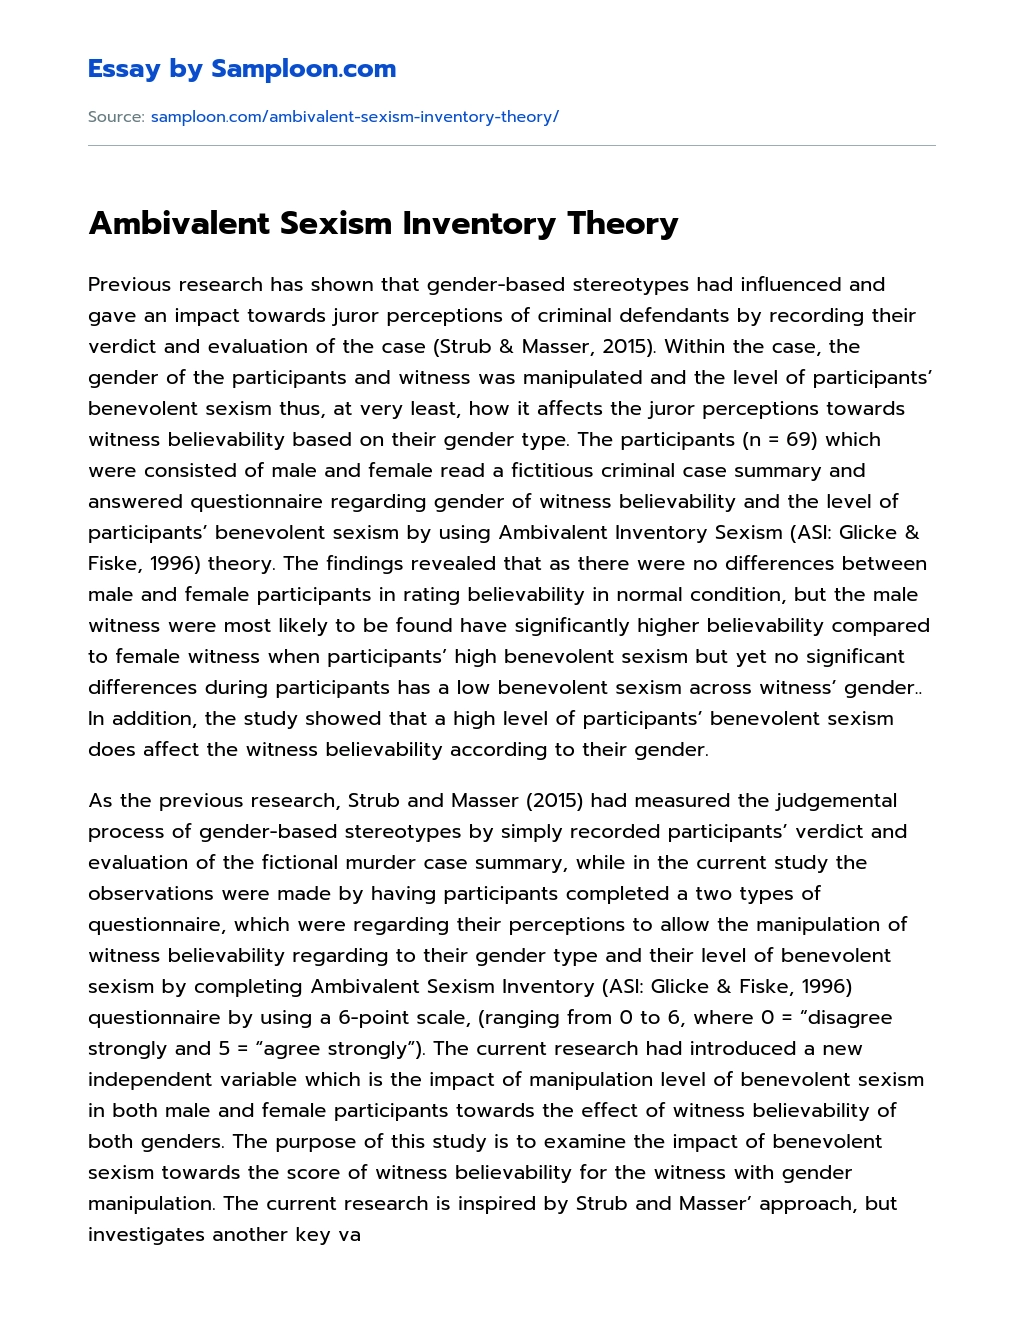 Ambivalent Sexism Inventory Theory essay